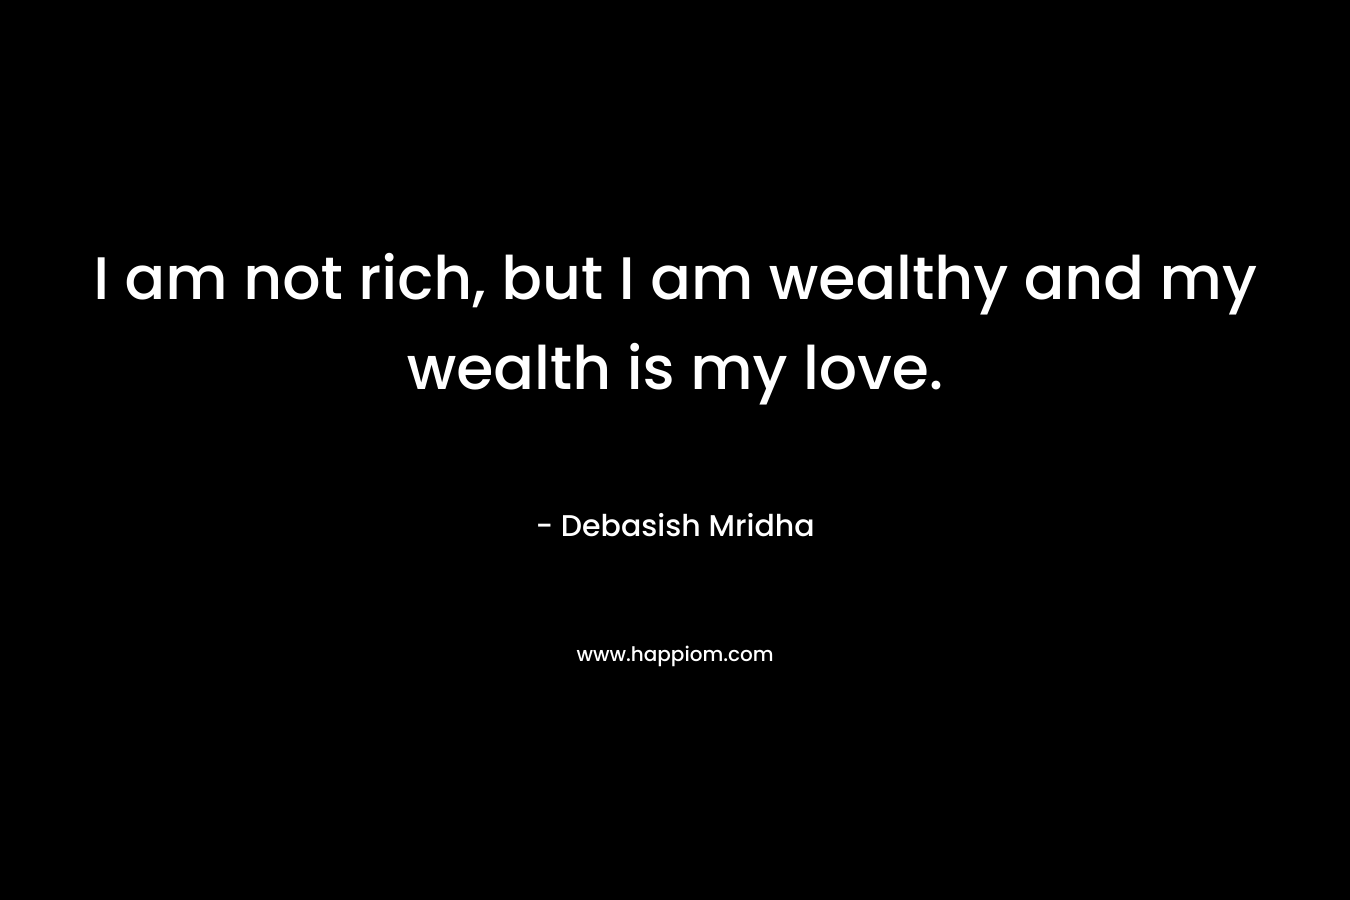 I am not rich, but I am wealthy and my wealth is my love.